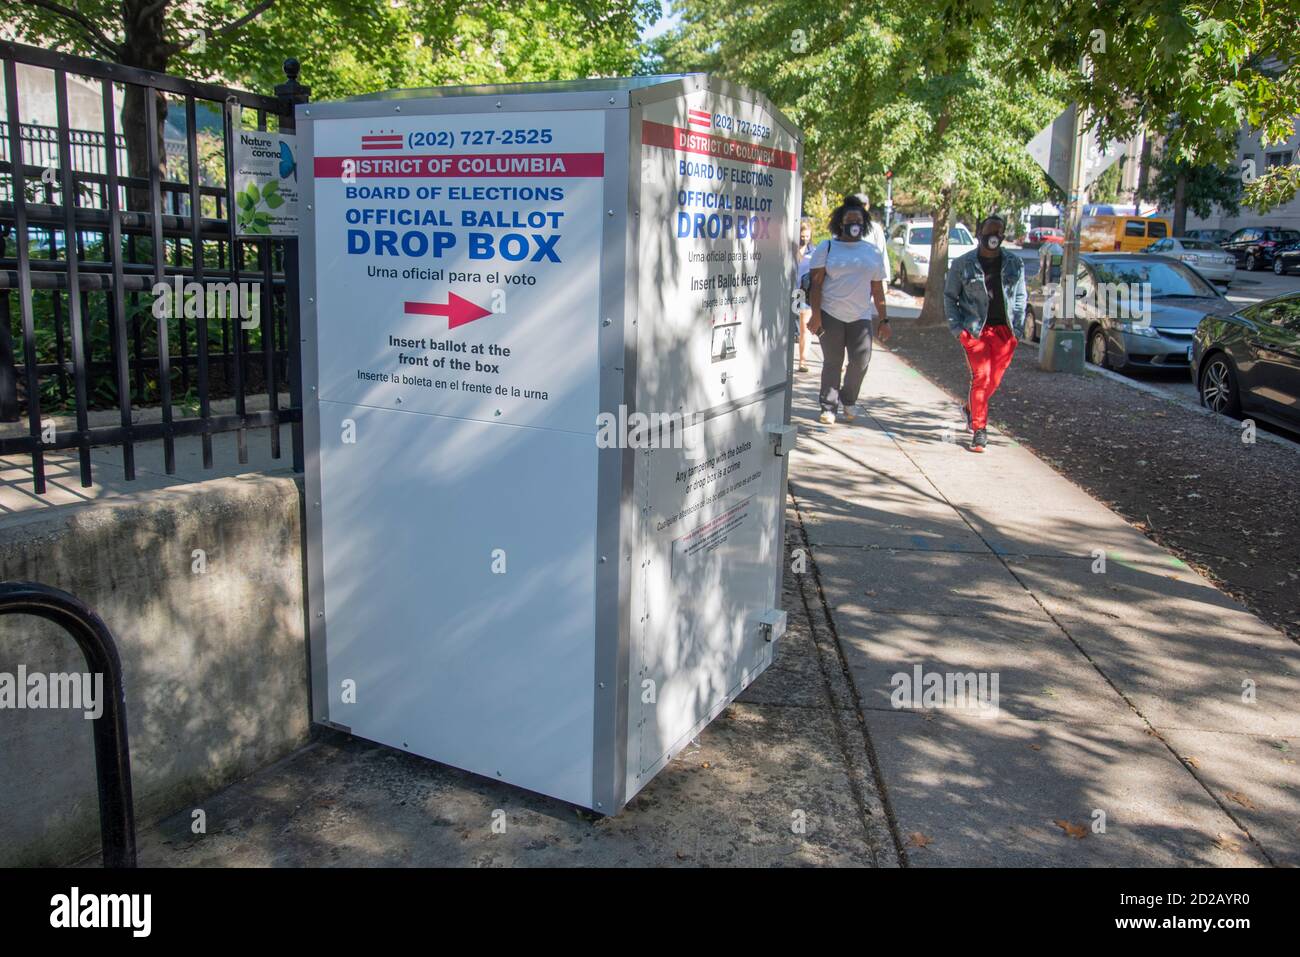 Offical Ballot Drop Box  at the Stead Park playground on P Street NW in Washington, DC.  Similar  ballot collection points are appearing in numerous l Stock Photo